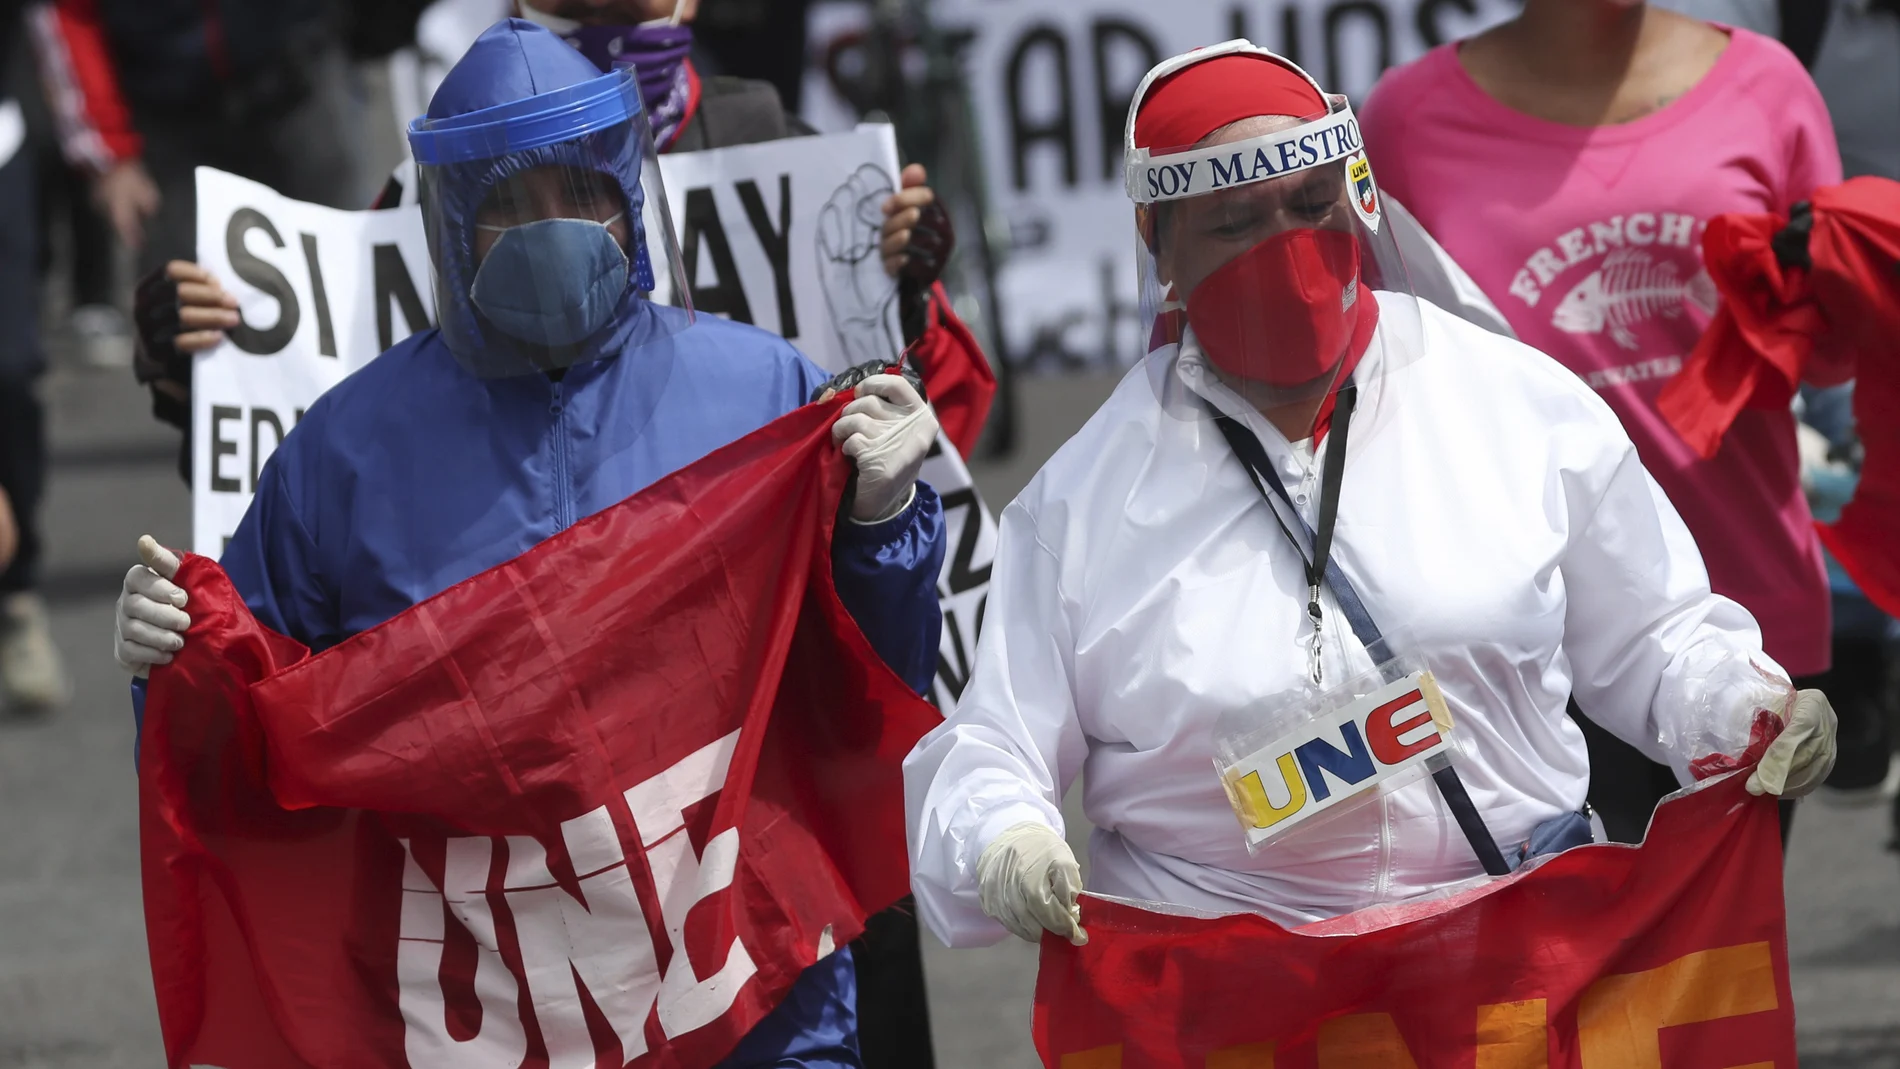 Central University teacher join students protesting education budget cuts, proposed by President Lenin Moreno to ease the economic pressure caused by the COVID-19 pandemic in Quito, Ecuador, Monday, May 11, 2020. (AP Photo/Dolores Ochoa)